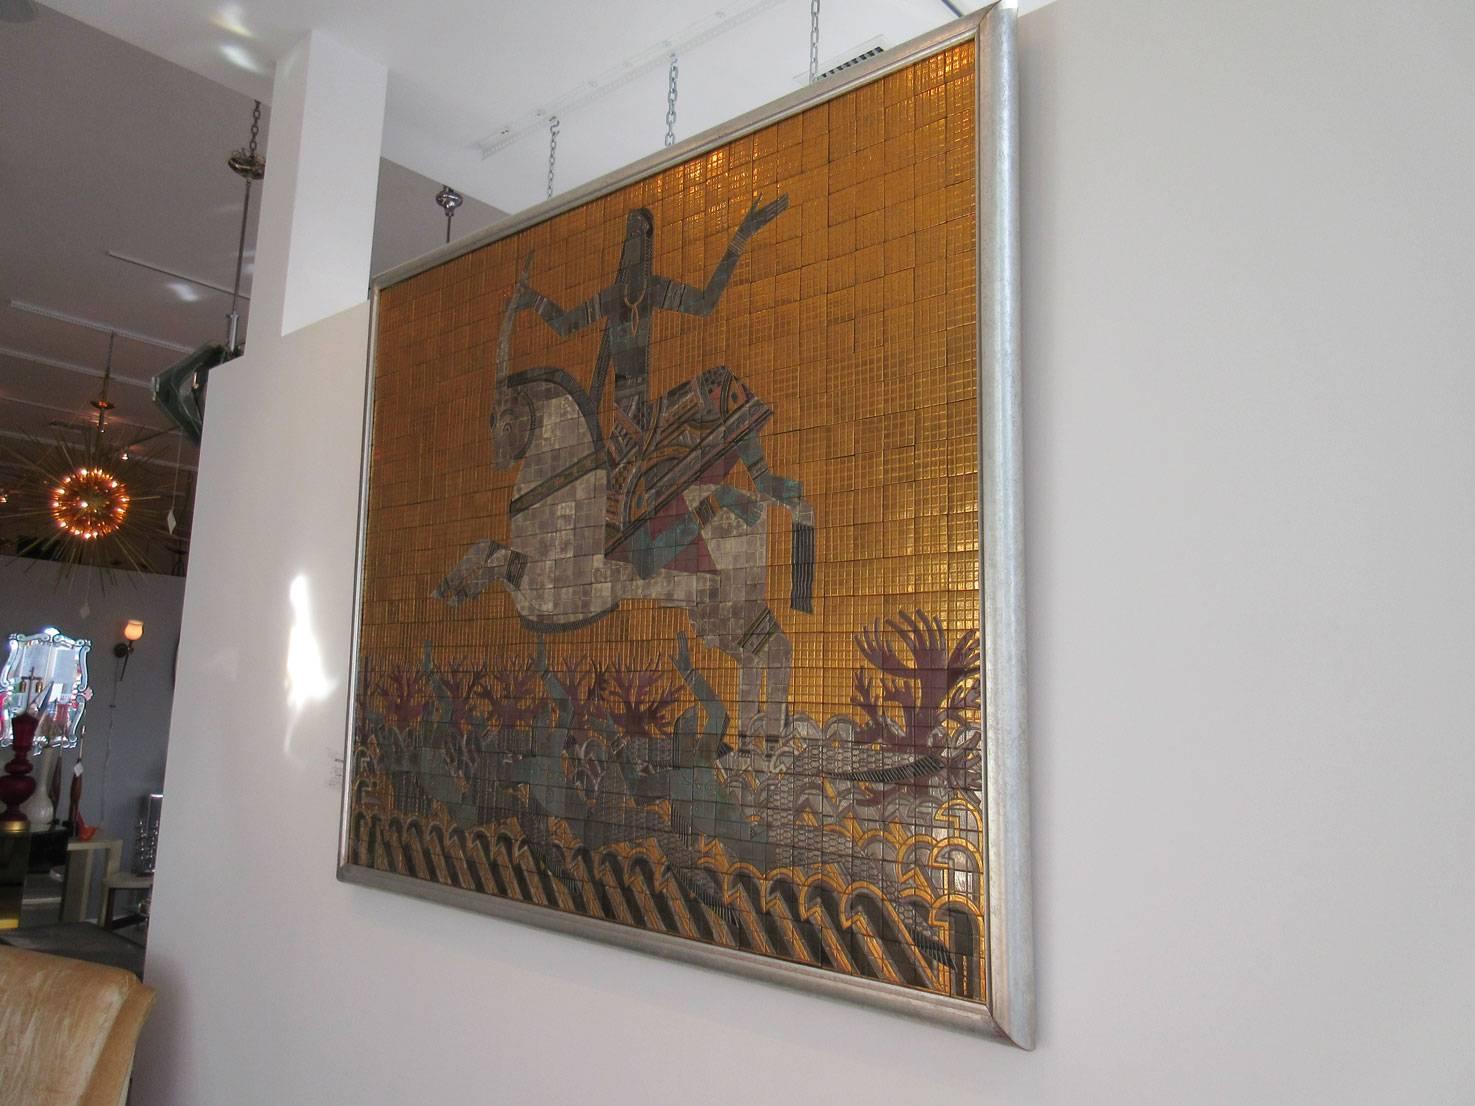 Mosaic wall applique featuring figural tableau by Russian Artist Valentin Shabaeff (1891-1977). This piece was created in 1930s. The imagery is Egyptian Revival with gold mosaic background and central figure of warrior on horseback.